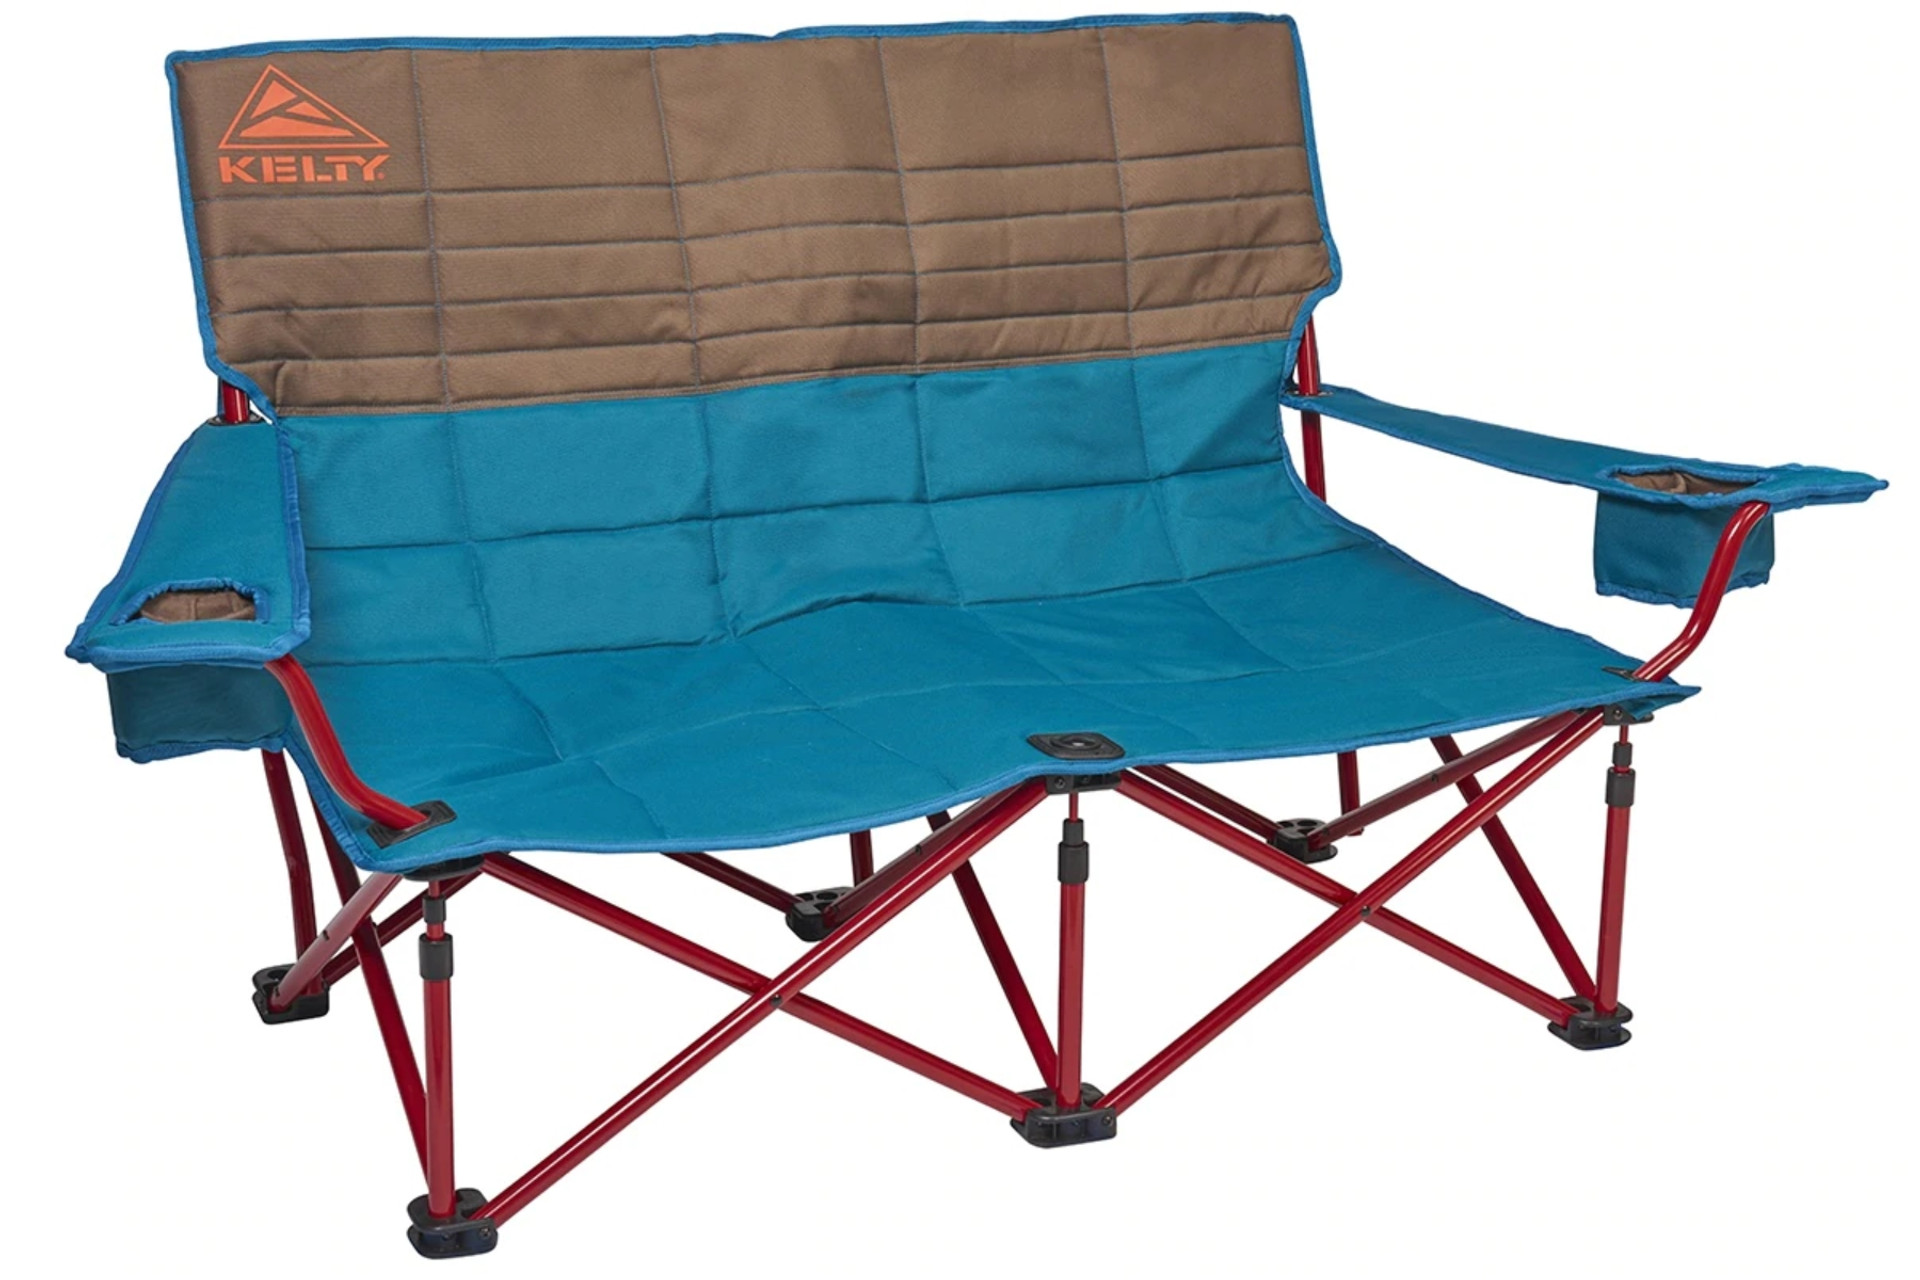 double wide camping chair